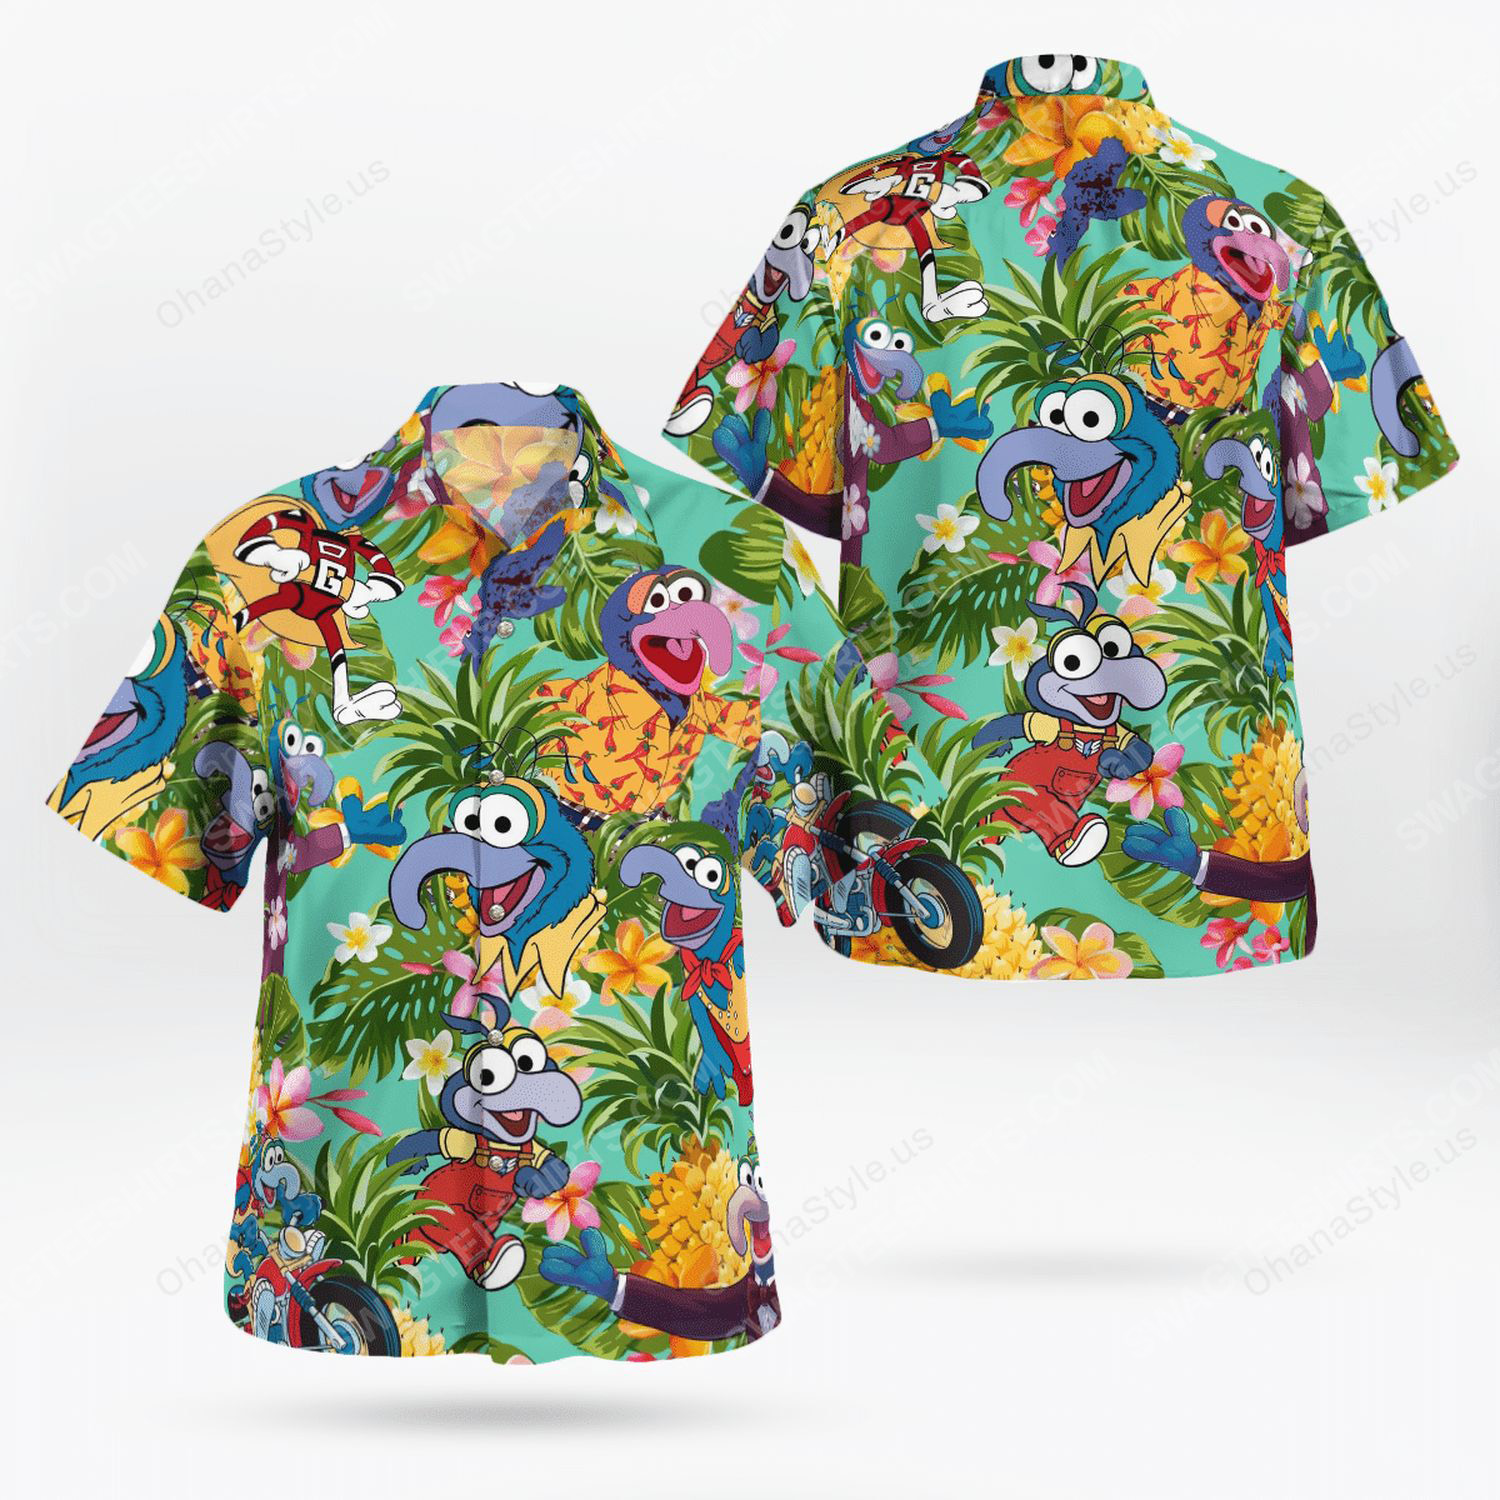 Gonzo's Wild Threads and Muppet Show Marvels: Exploring the Gonzo Hawaiian Shirt and the Whimsical Universe of Gonzo